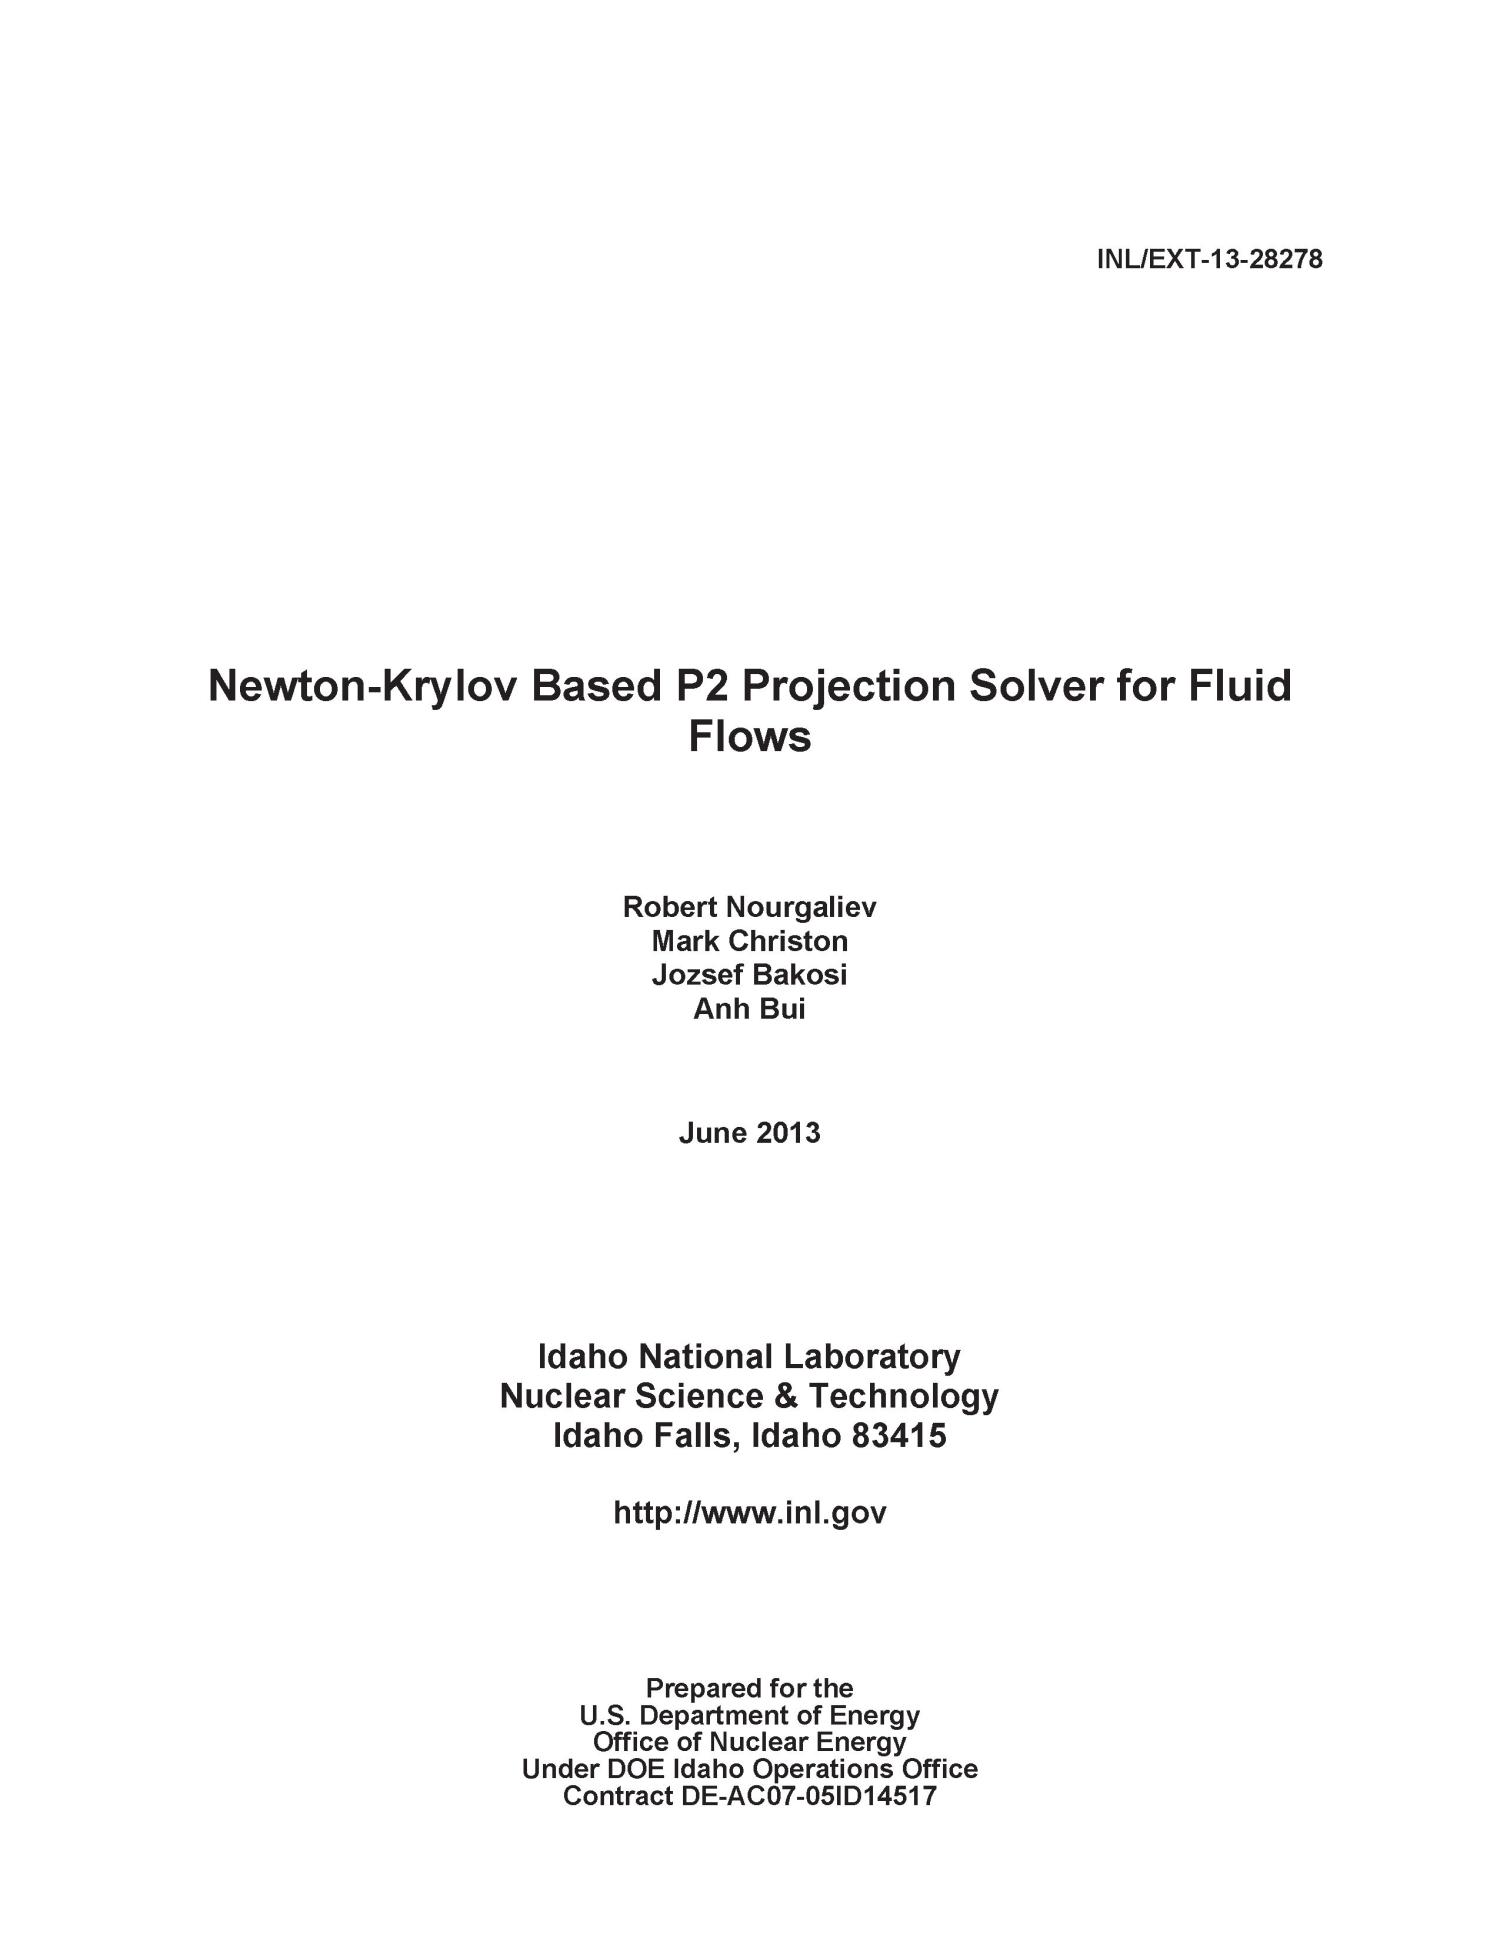 Newton-Krylov based P2 Projection Solver for Fluid
                                                
                                                    [Sequence #]: 2 of 116
                                                